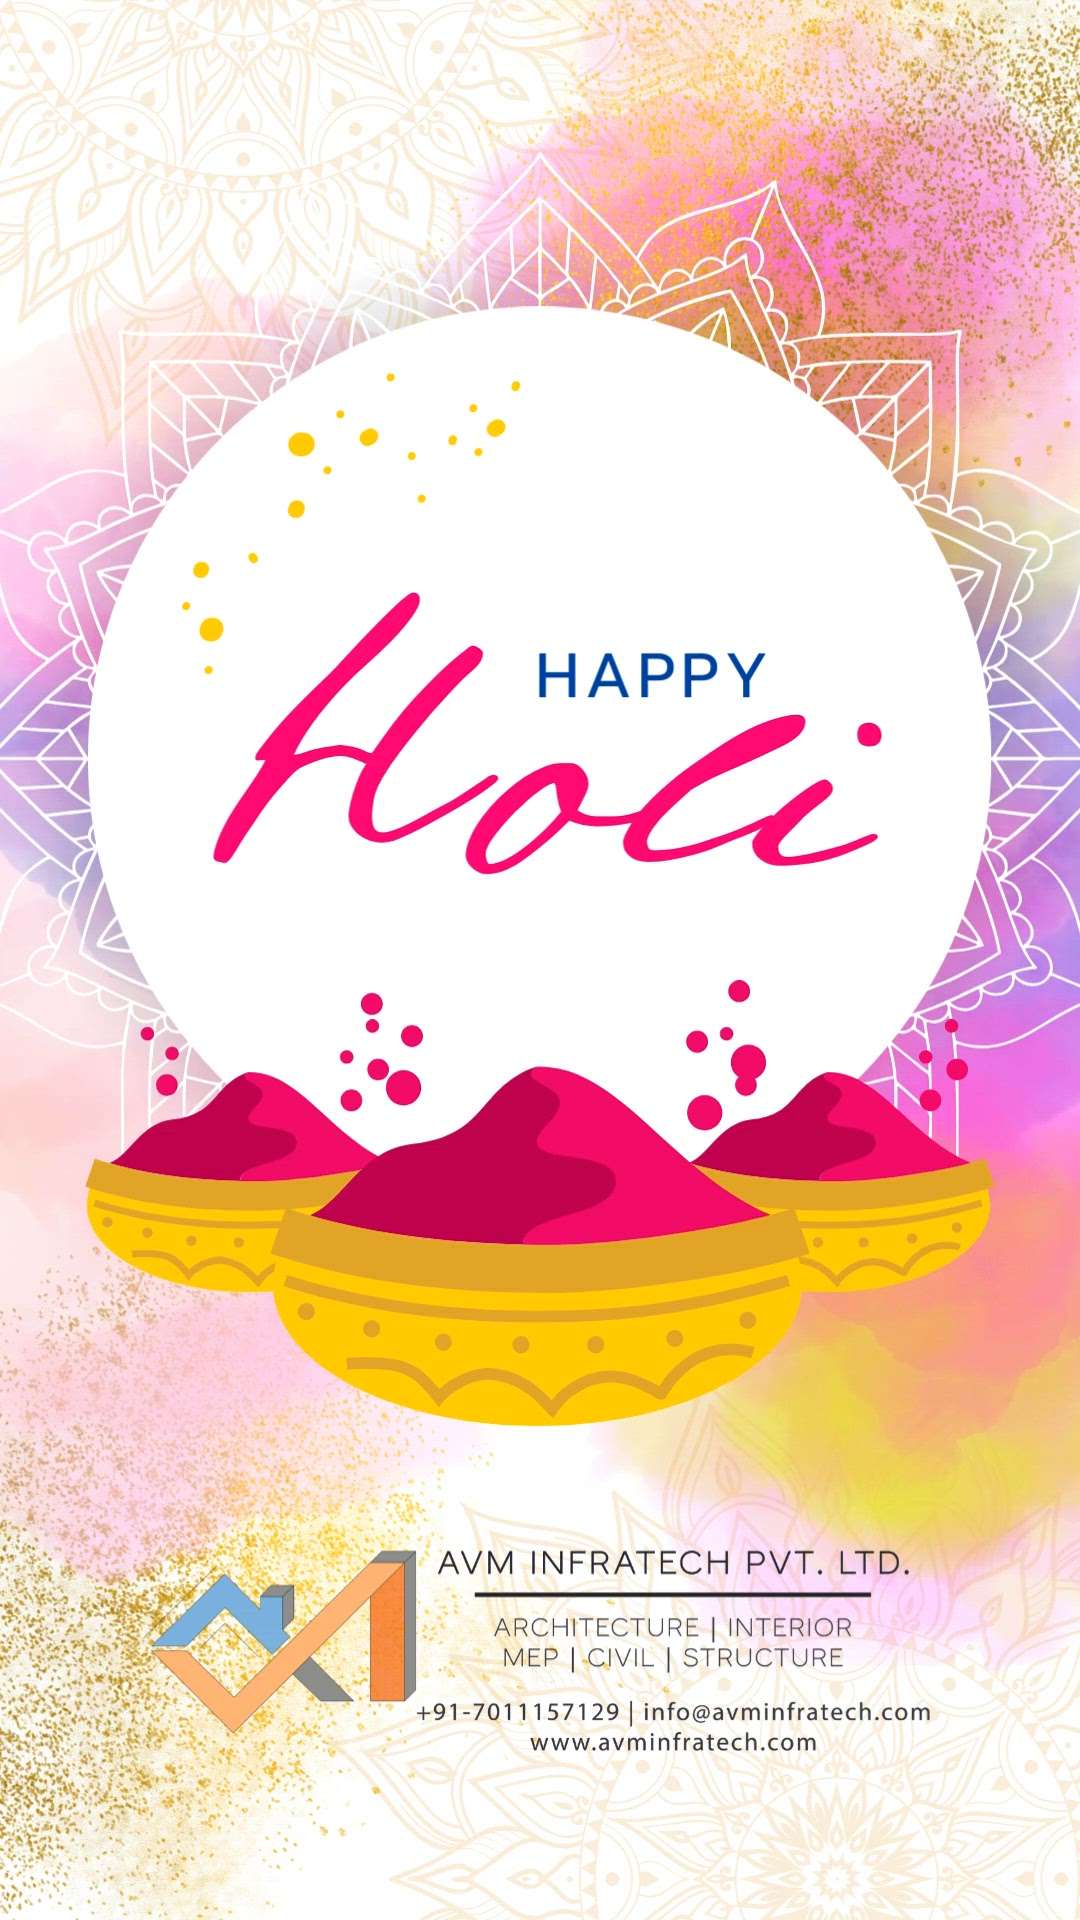 Wishing you and your family a very Happy Holi 🎊


Follow us for more such amazing updates. 
.
.
#happyholi #happy #holi #holi2024 #2024 #festival #festivalofcolours #festivalofcolors #indianfestival #india #avminfratech